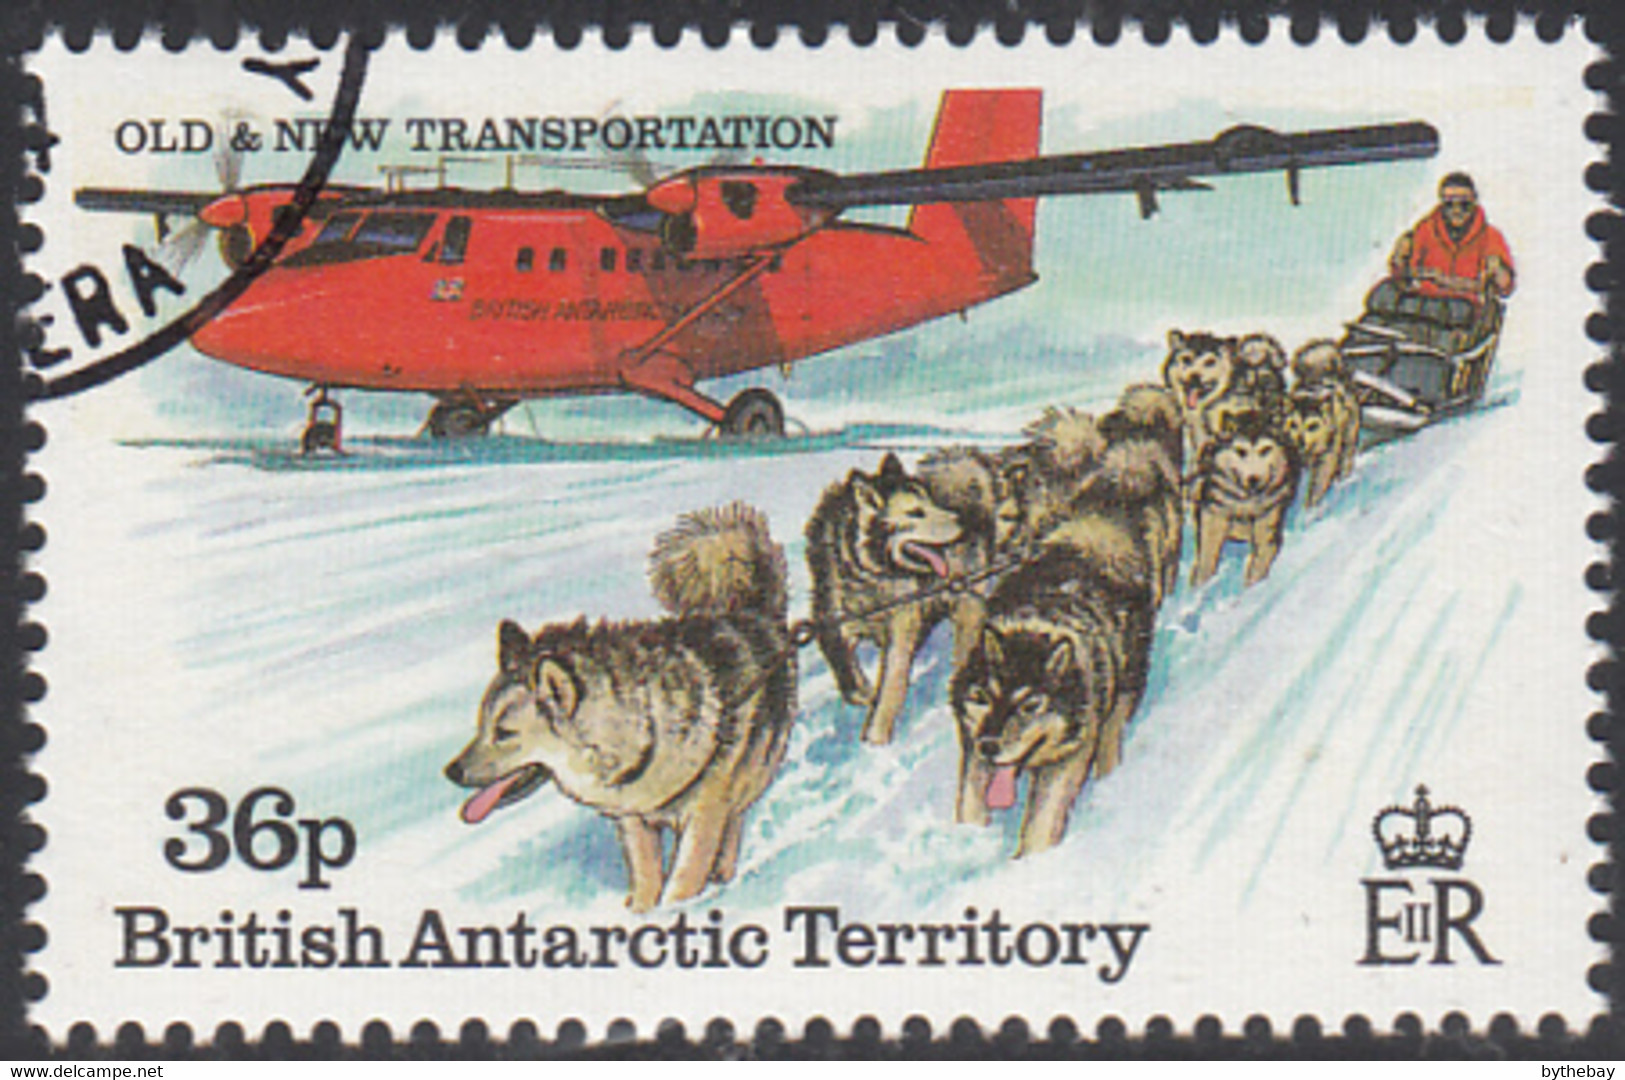 British Antarctic Territory 1994 Used Sc #221 36p Dogsled Team, DHC-6 Twin Otter - Usados